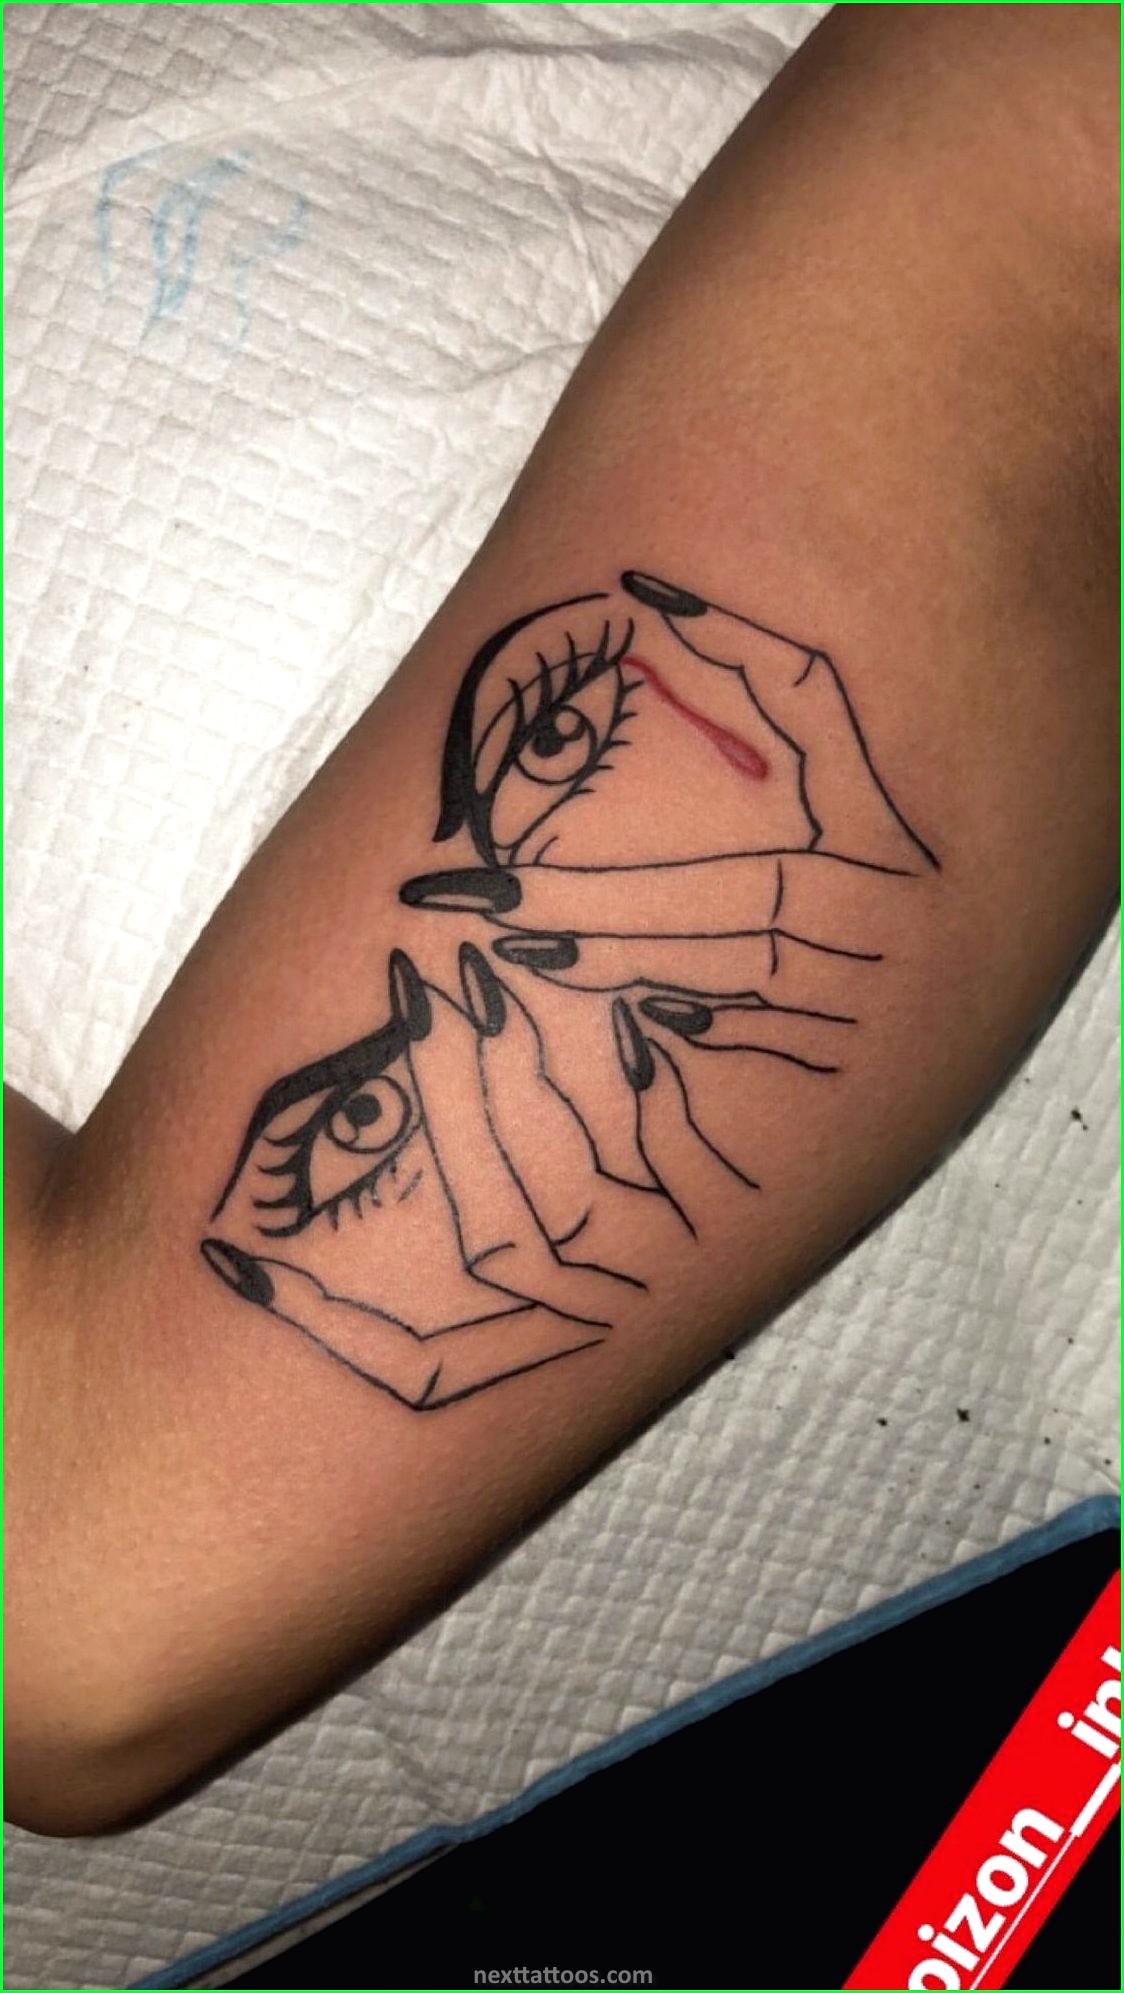 Unique Tattoo Ideas With Meaning